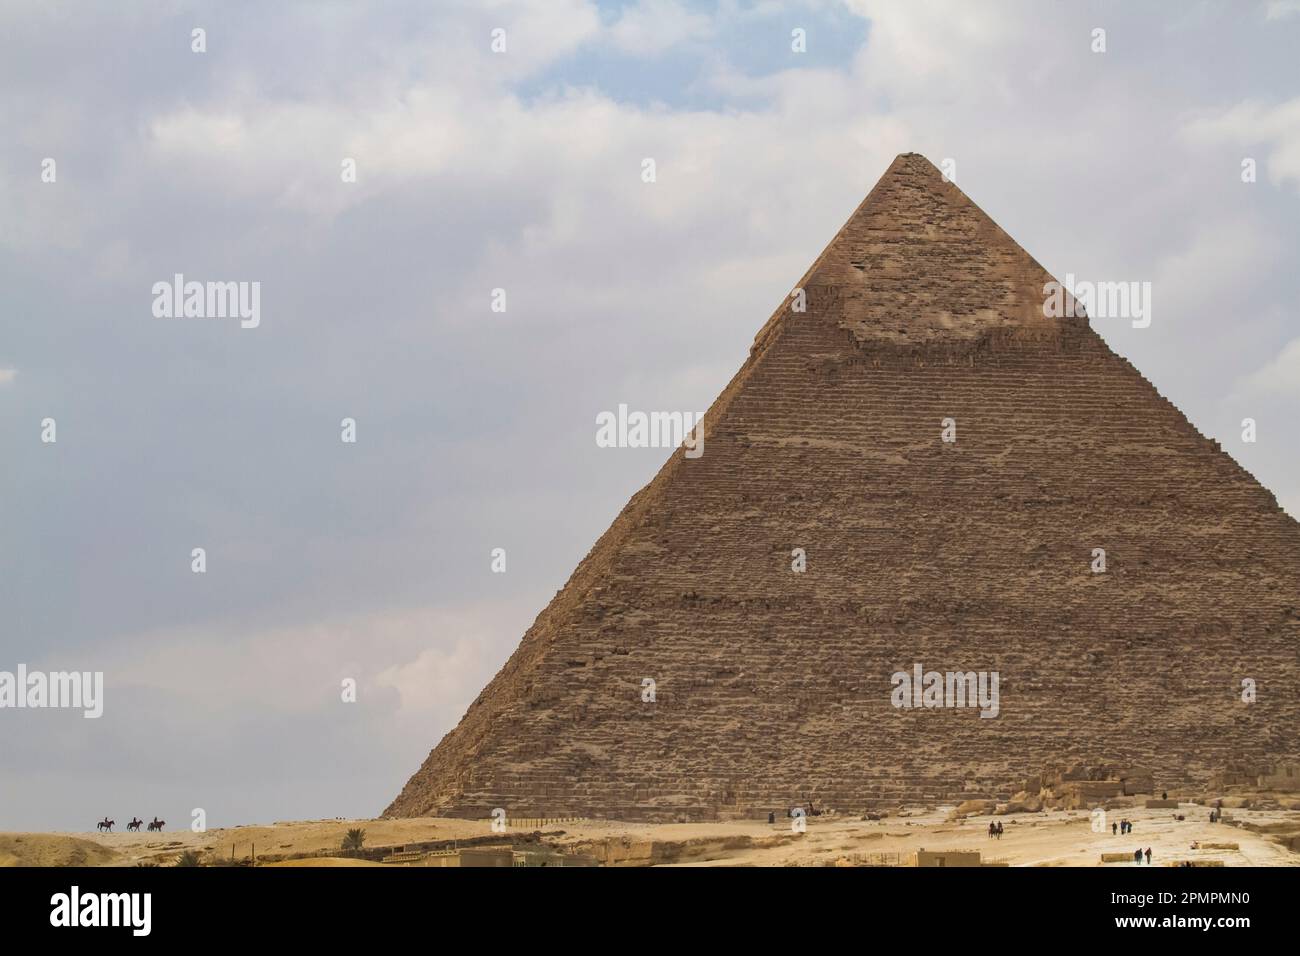 The Great Pyramid of Giza in Egypt towers over the desert; Cairo, Egypt Stock Photo